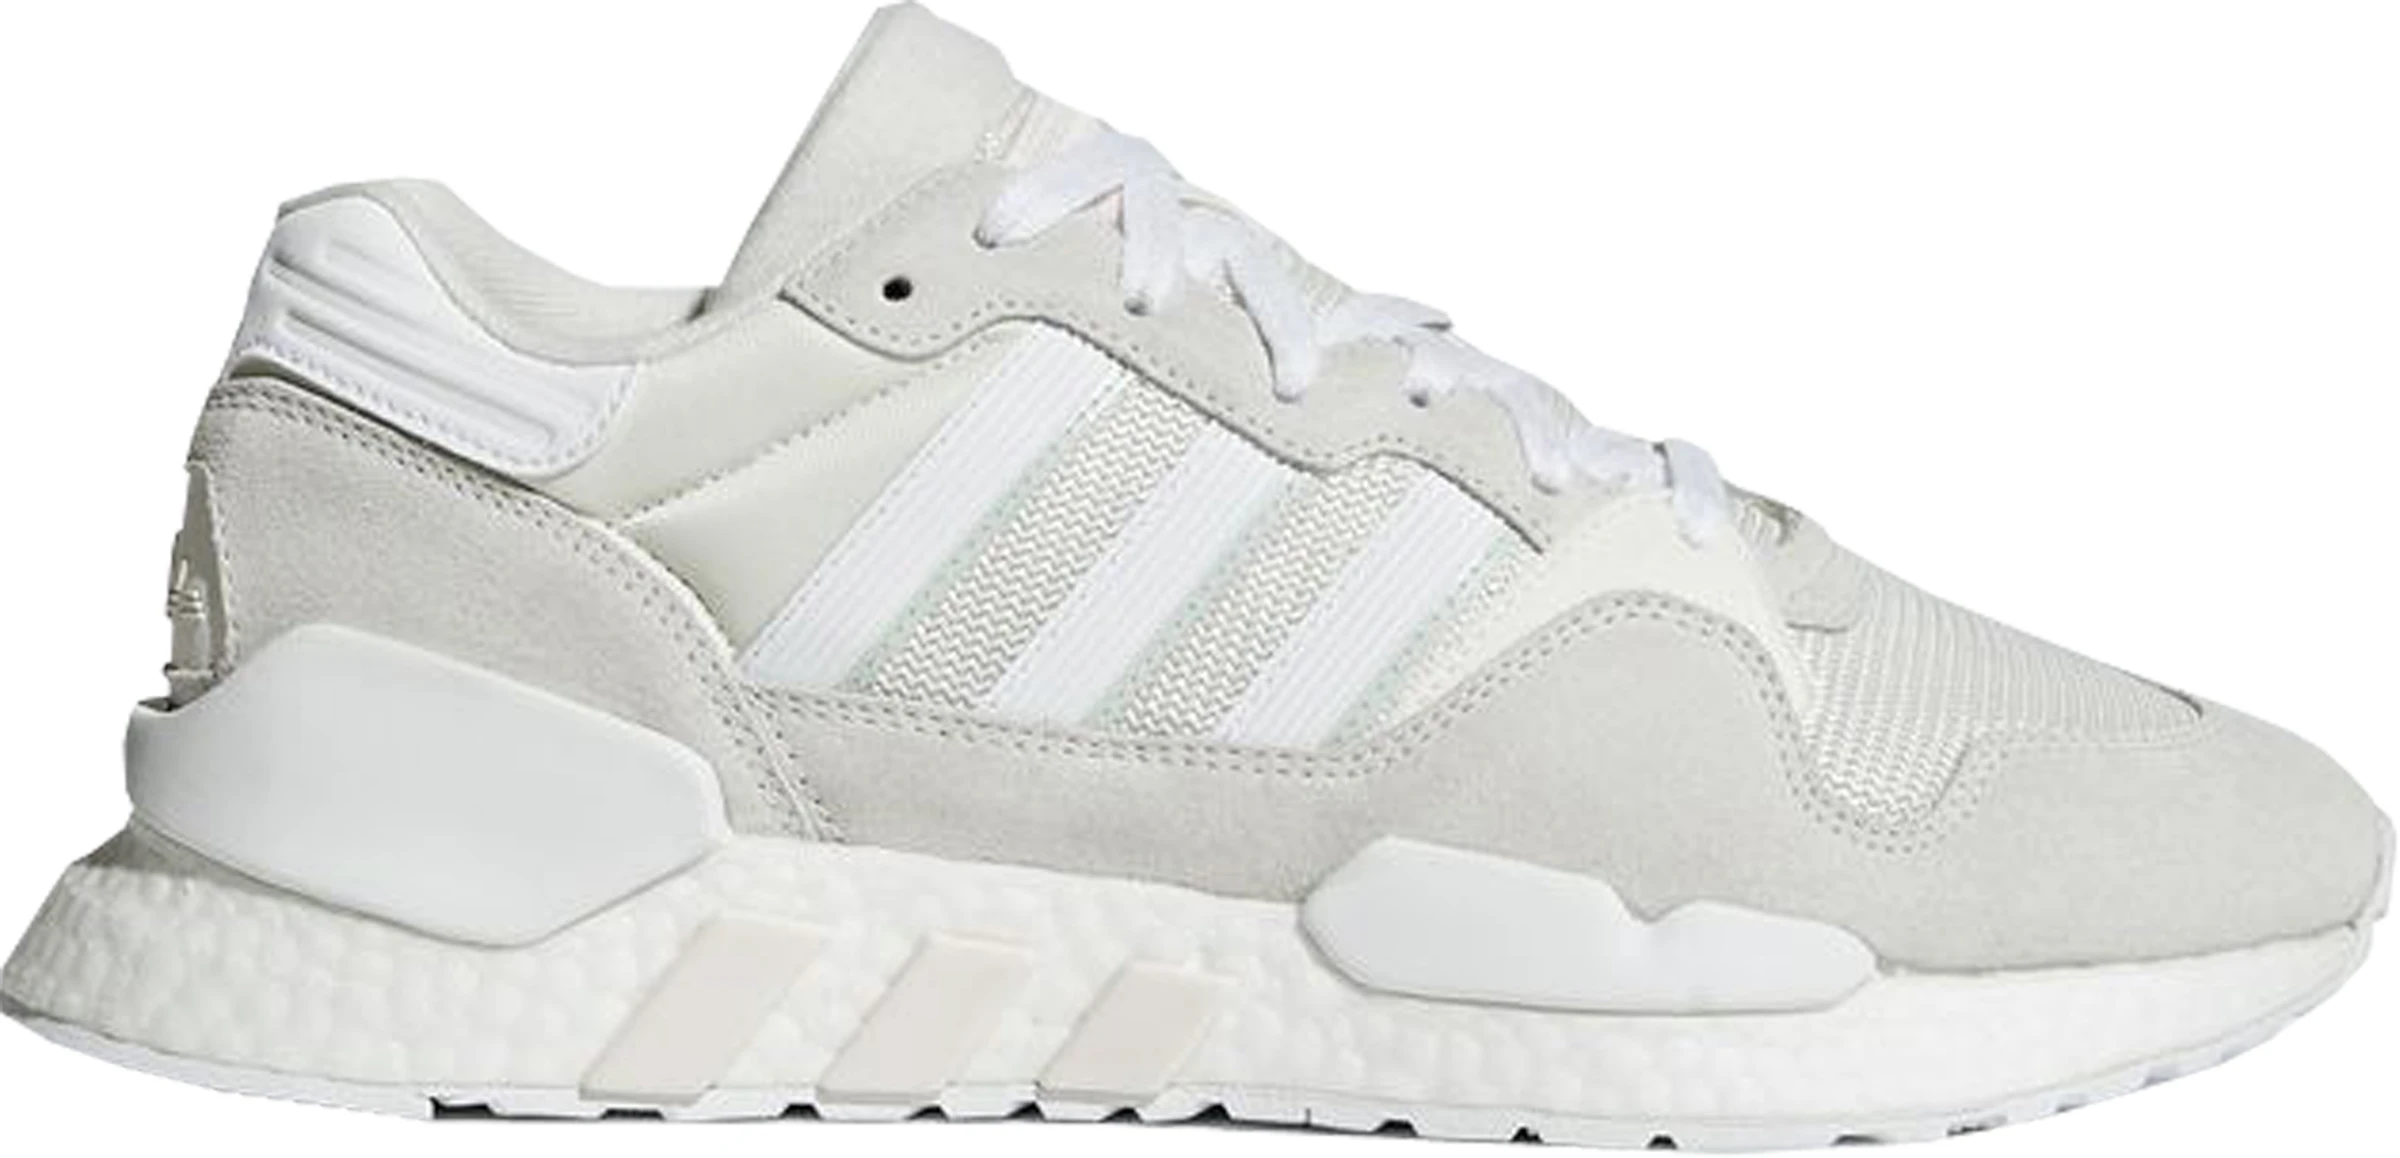 adidas ZX 930 x EQT Never Made Pack Triple White G27831 -